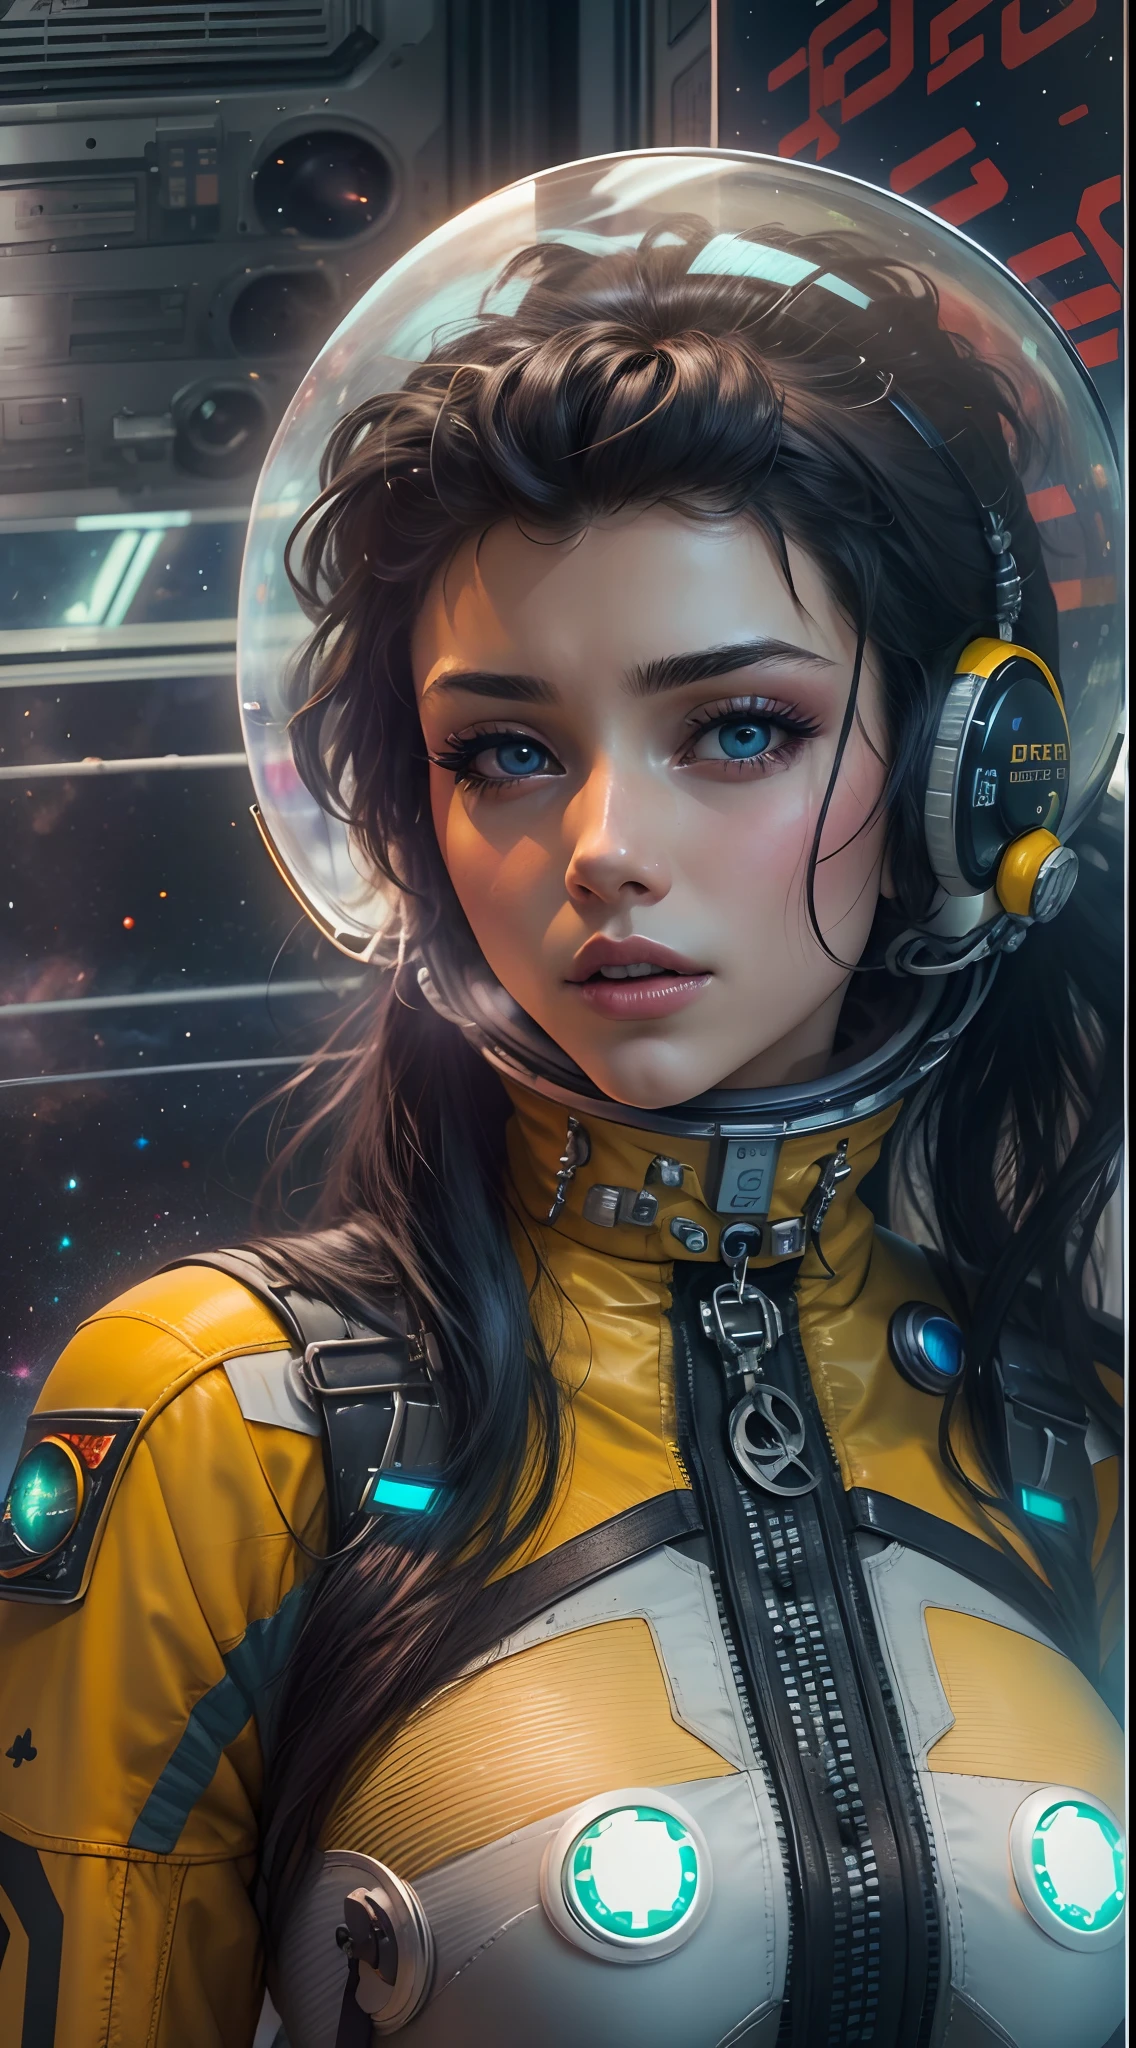 unreal engine:1.4,UHD,The best quality:1.4, photorealistic:1.4, skin texture:1.4, Masterpiece:1.8,Perfect face Girl with yellow cyberpunk dress , half futuristic, Ladybug Big Spot Mix, Long tied blonde hair,cyberpunk style:1.4 ,(Space Station:1.4),（Beautiful and detailed eye description）